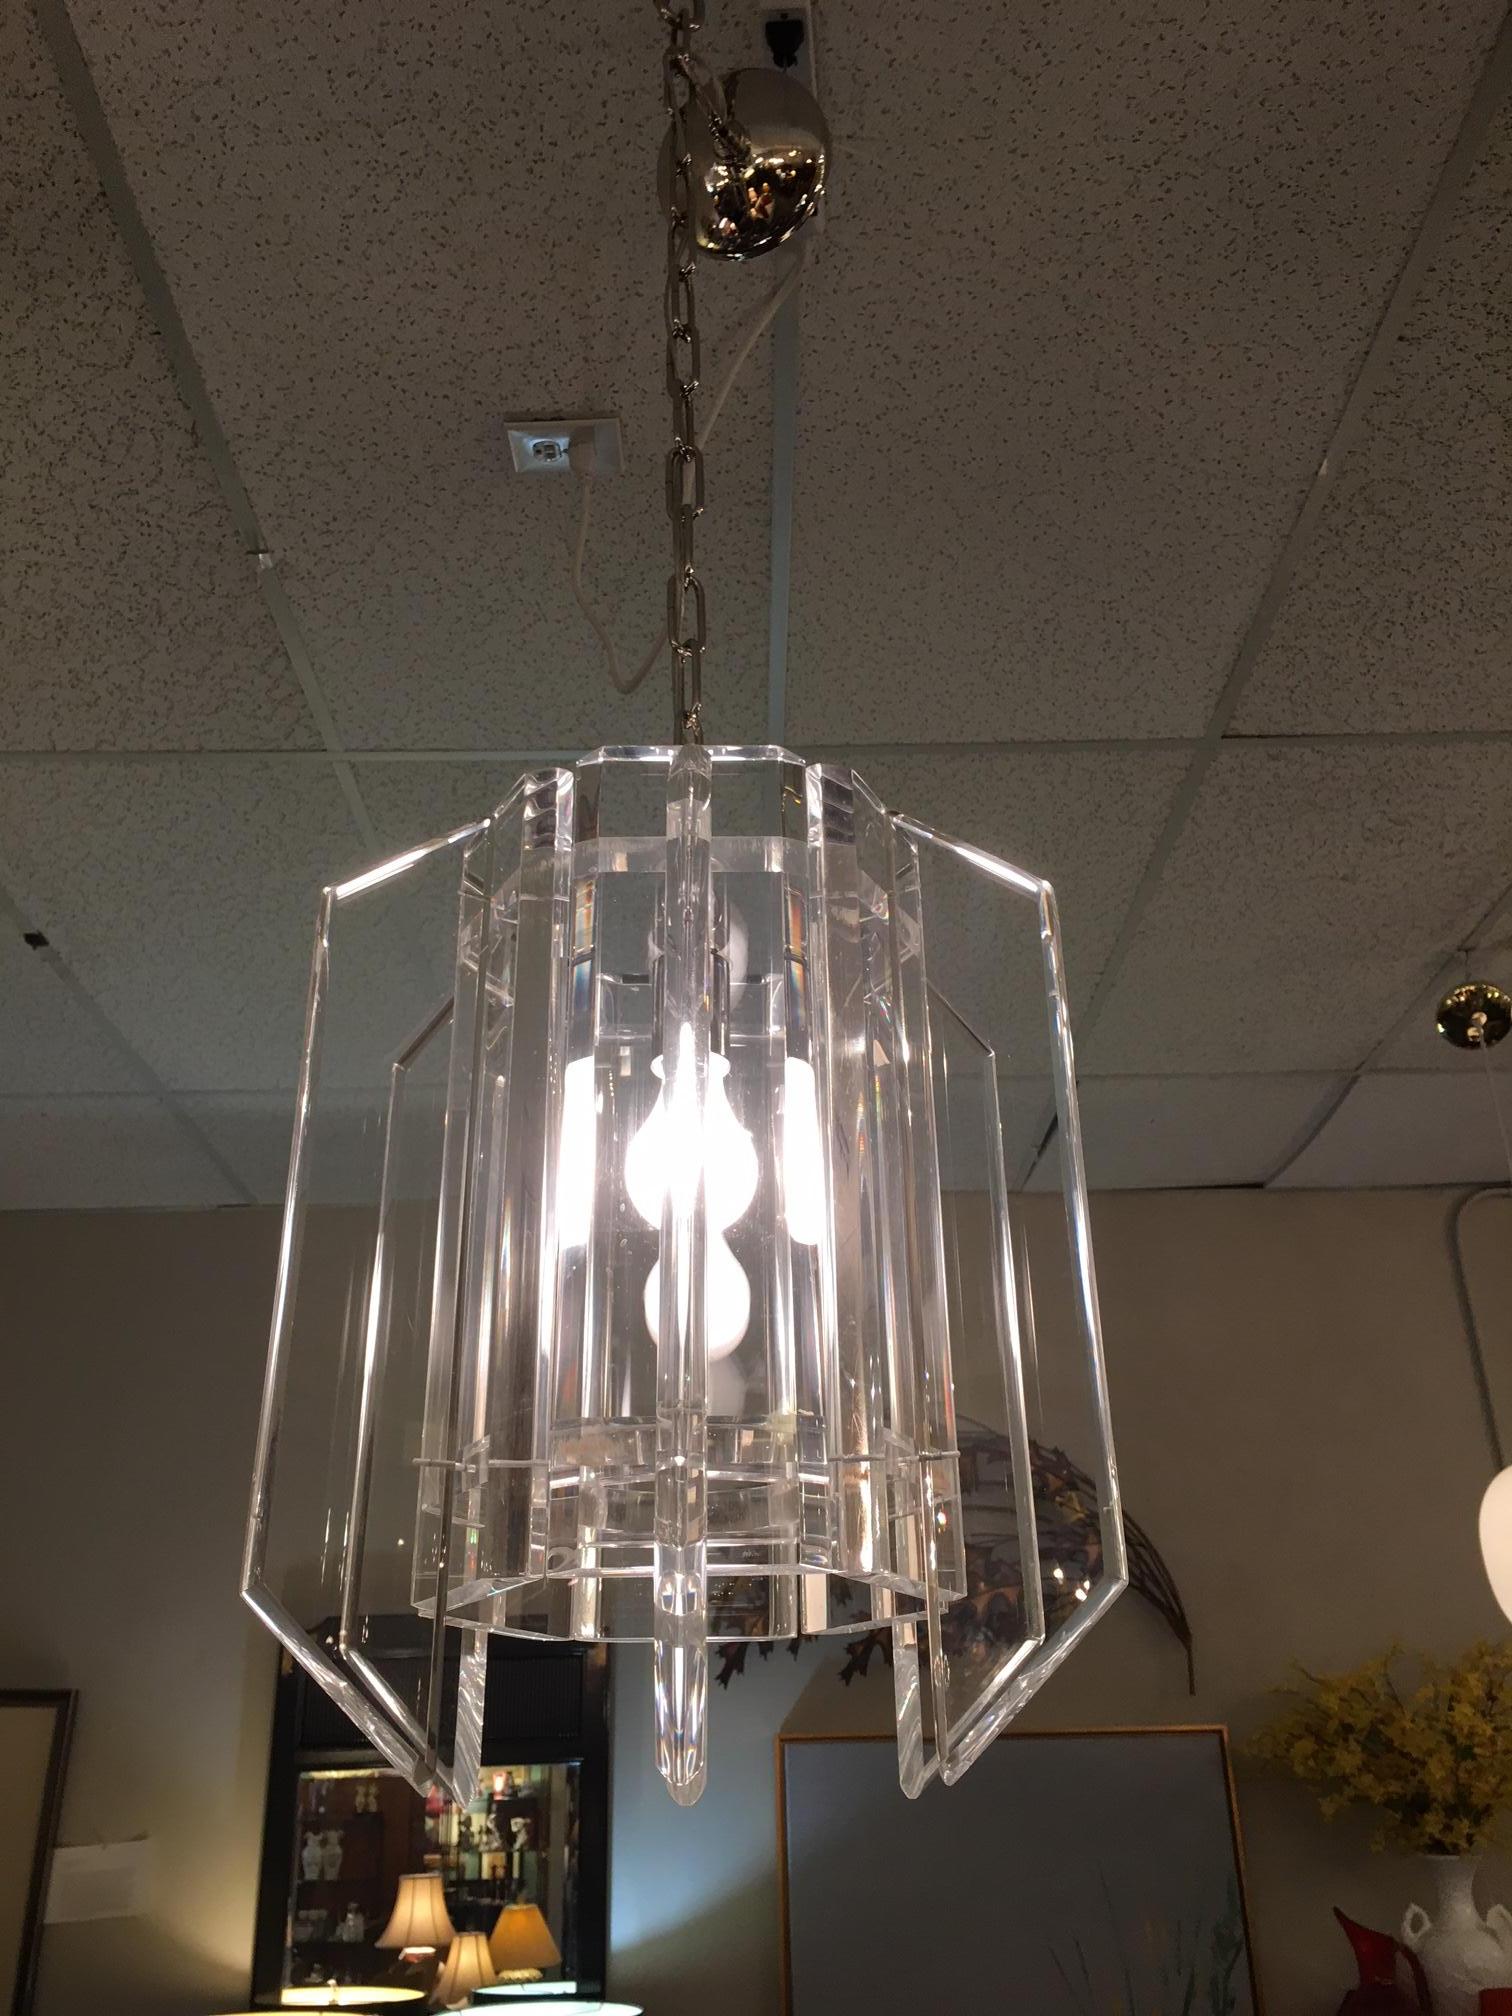 This Lucite midcentury chandelier is a restored midcentury piece. The aging chrome was replaced with new canopy and chain. The Lucite itself is in remarkable condition with practically no scratches. The chain is 60